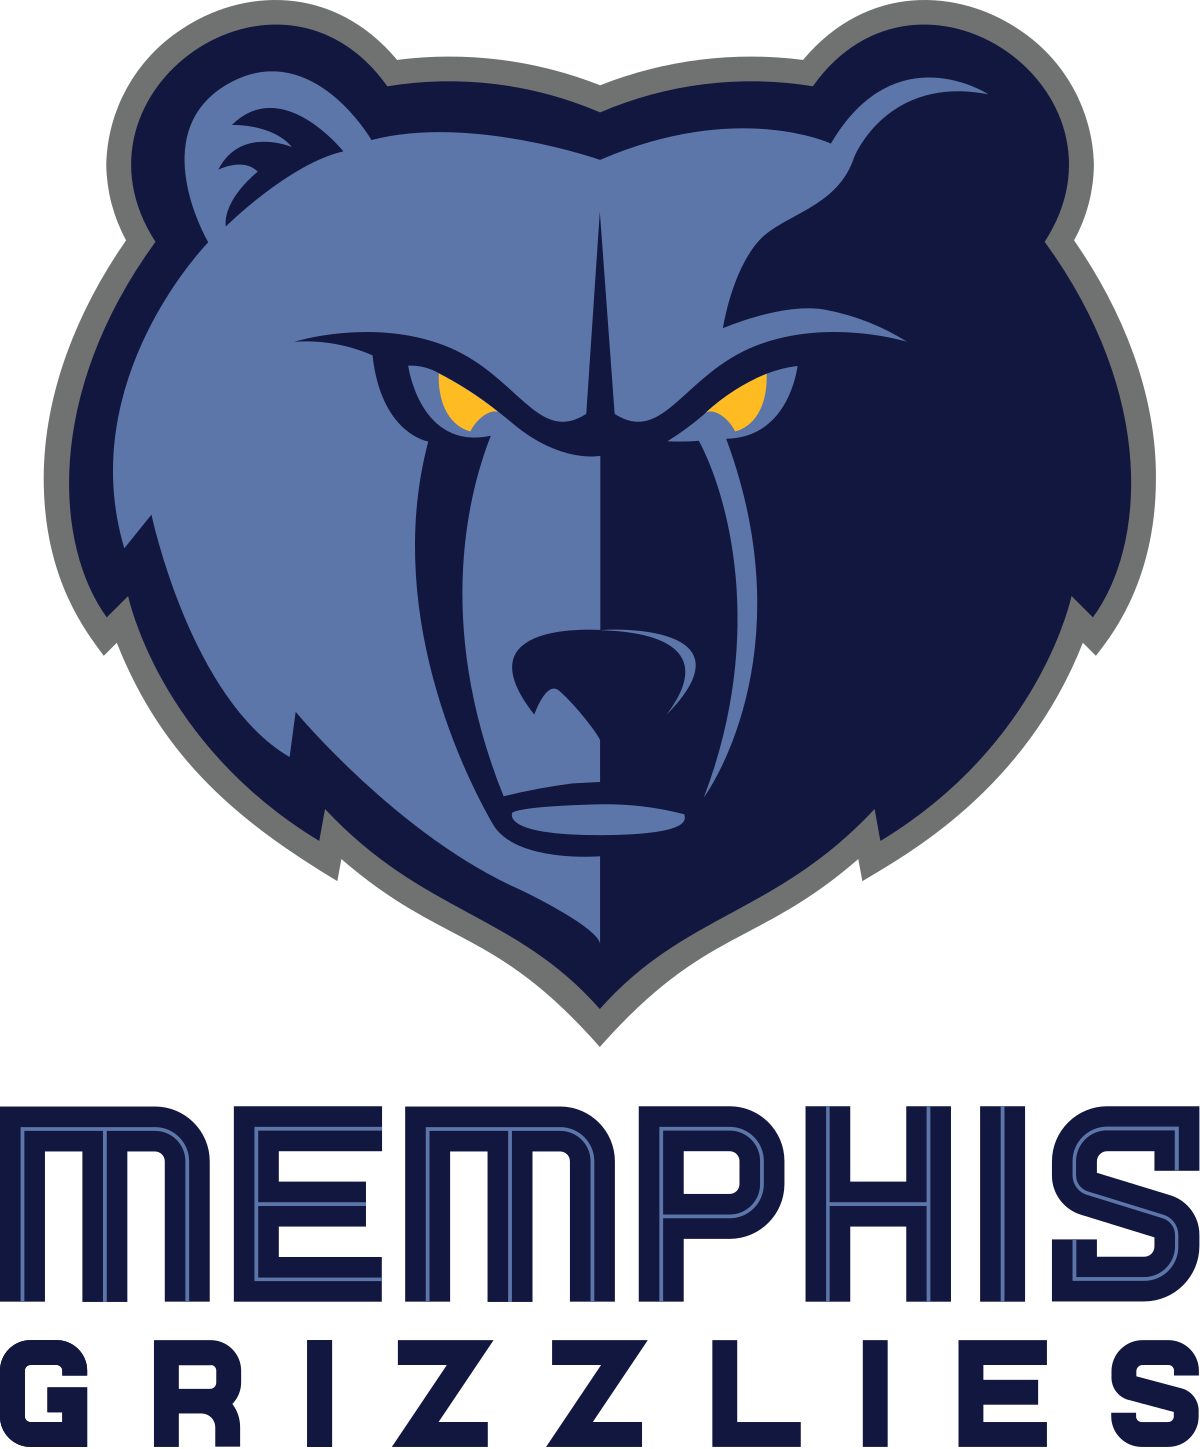 Grizzlies trade F Parsons to Hawks for Hill, Plumlee